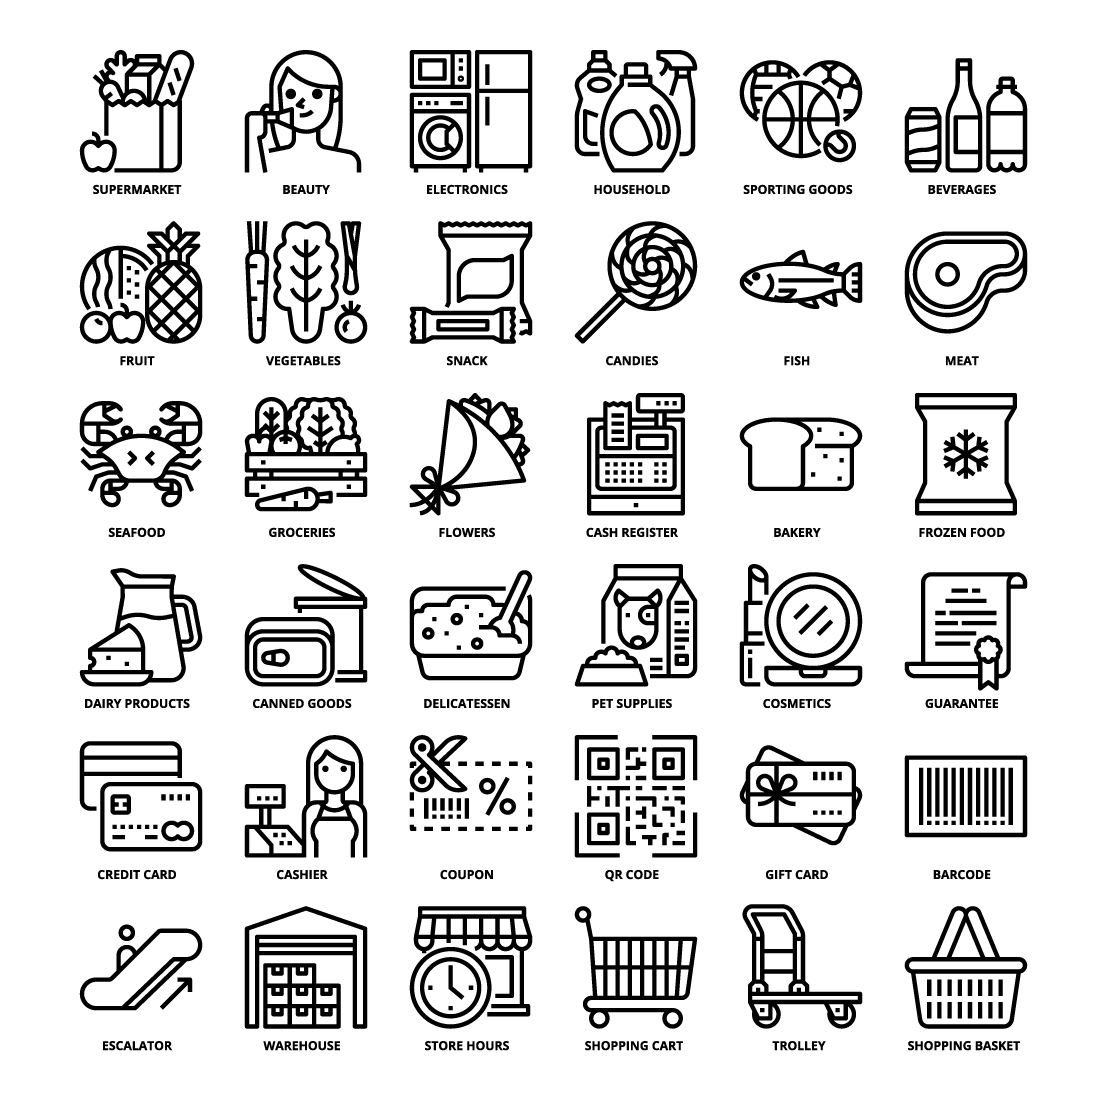 36 Supermarket Icons Set x 4 Styles preview image.